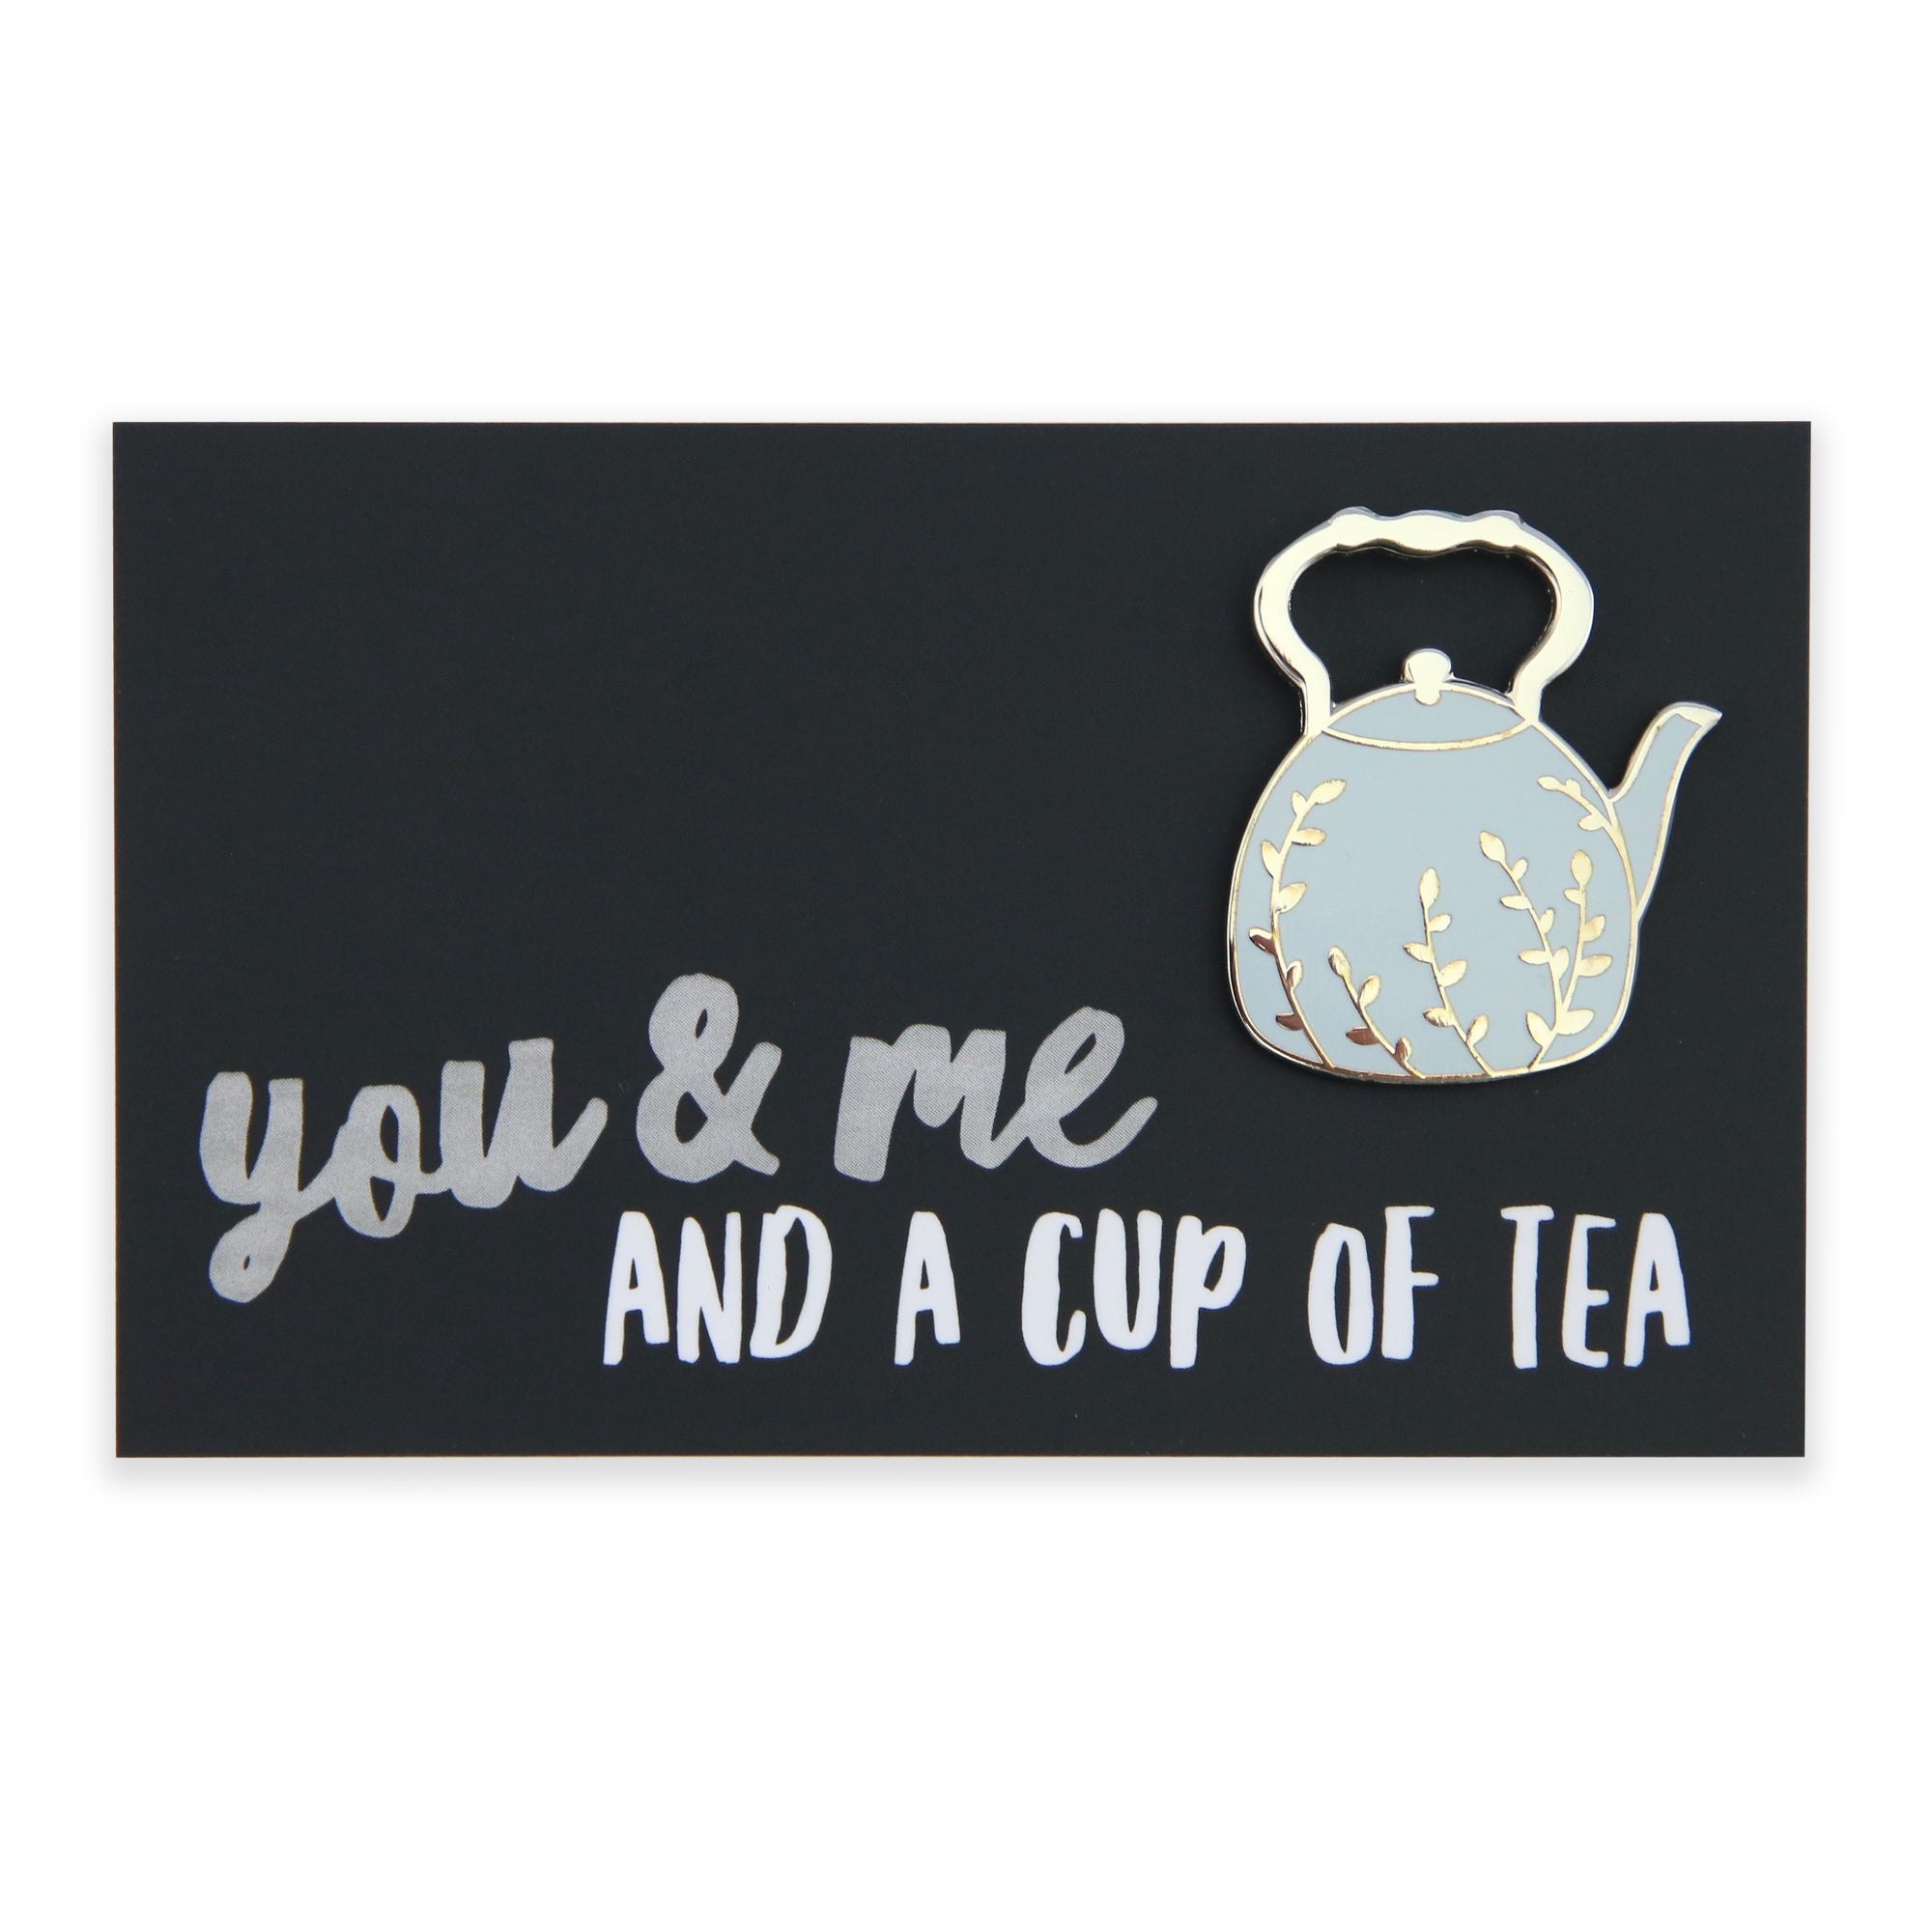 You & Me and a Cup of Tea - White and Gold Teapot Enamel Badge Pin - (12261)